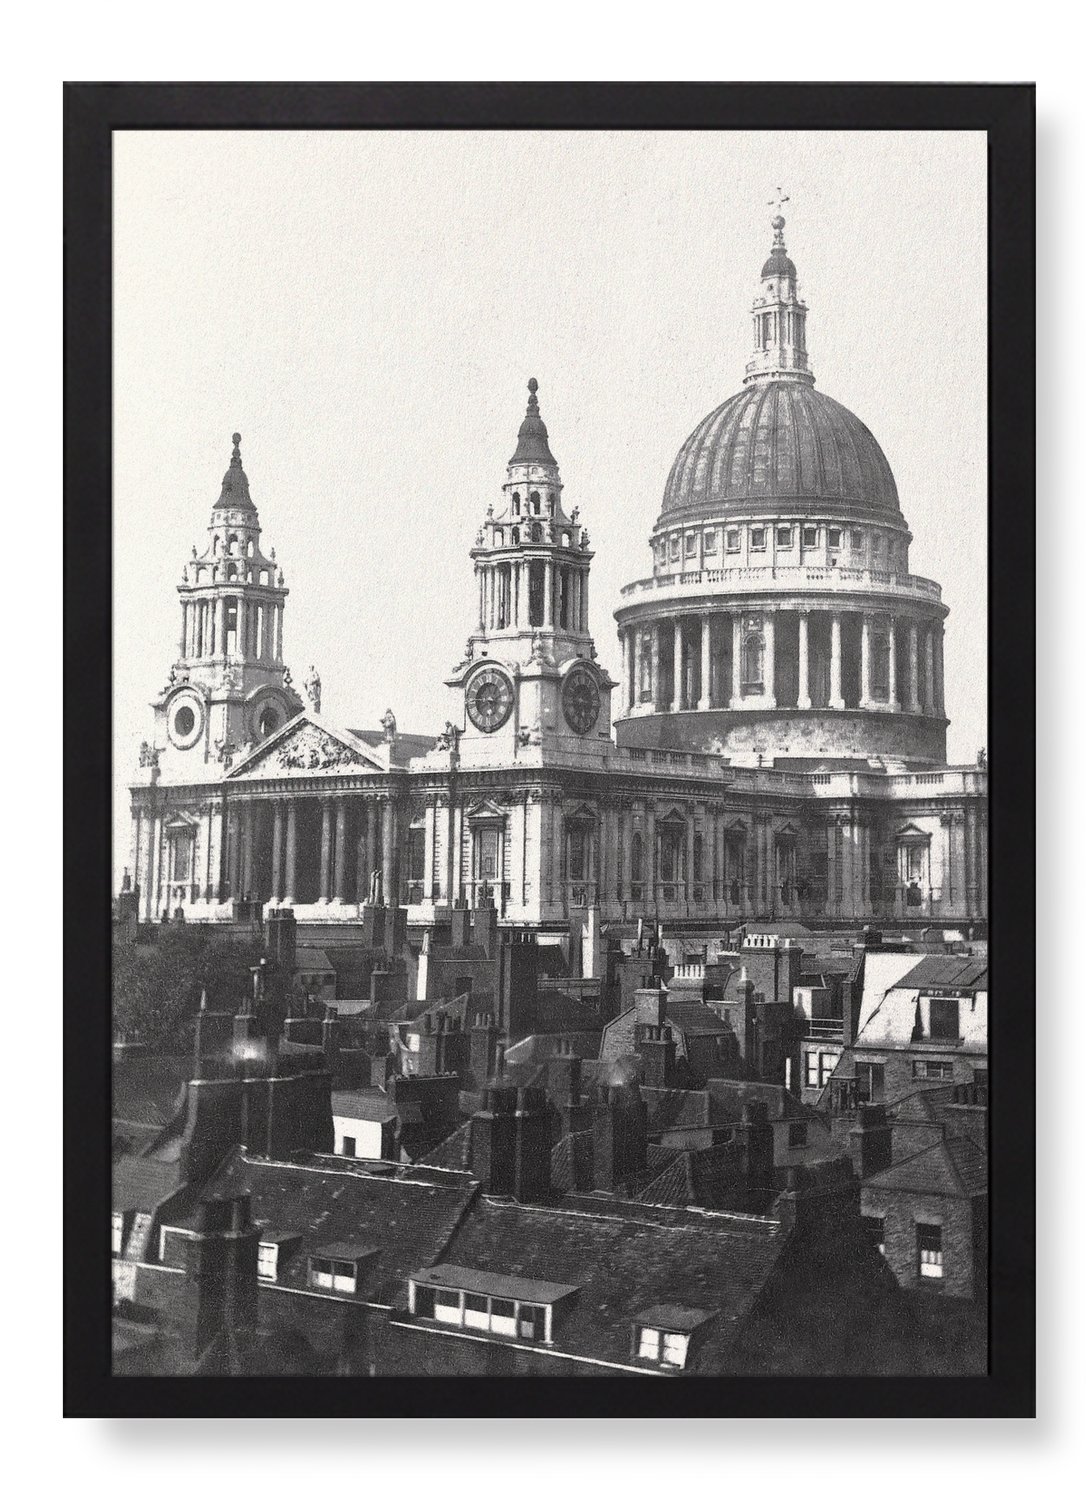 ST. PAUL'S CATHEDRAL (1862-79)